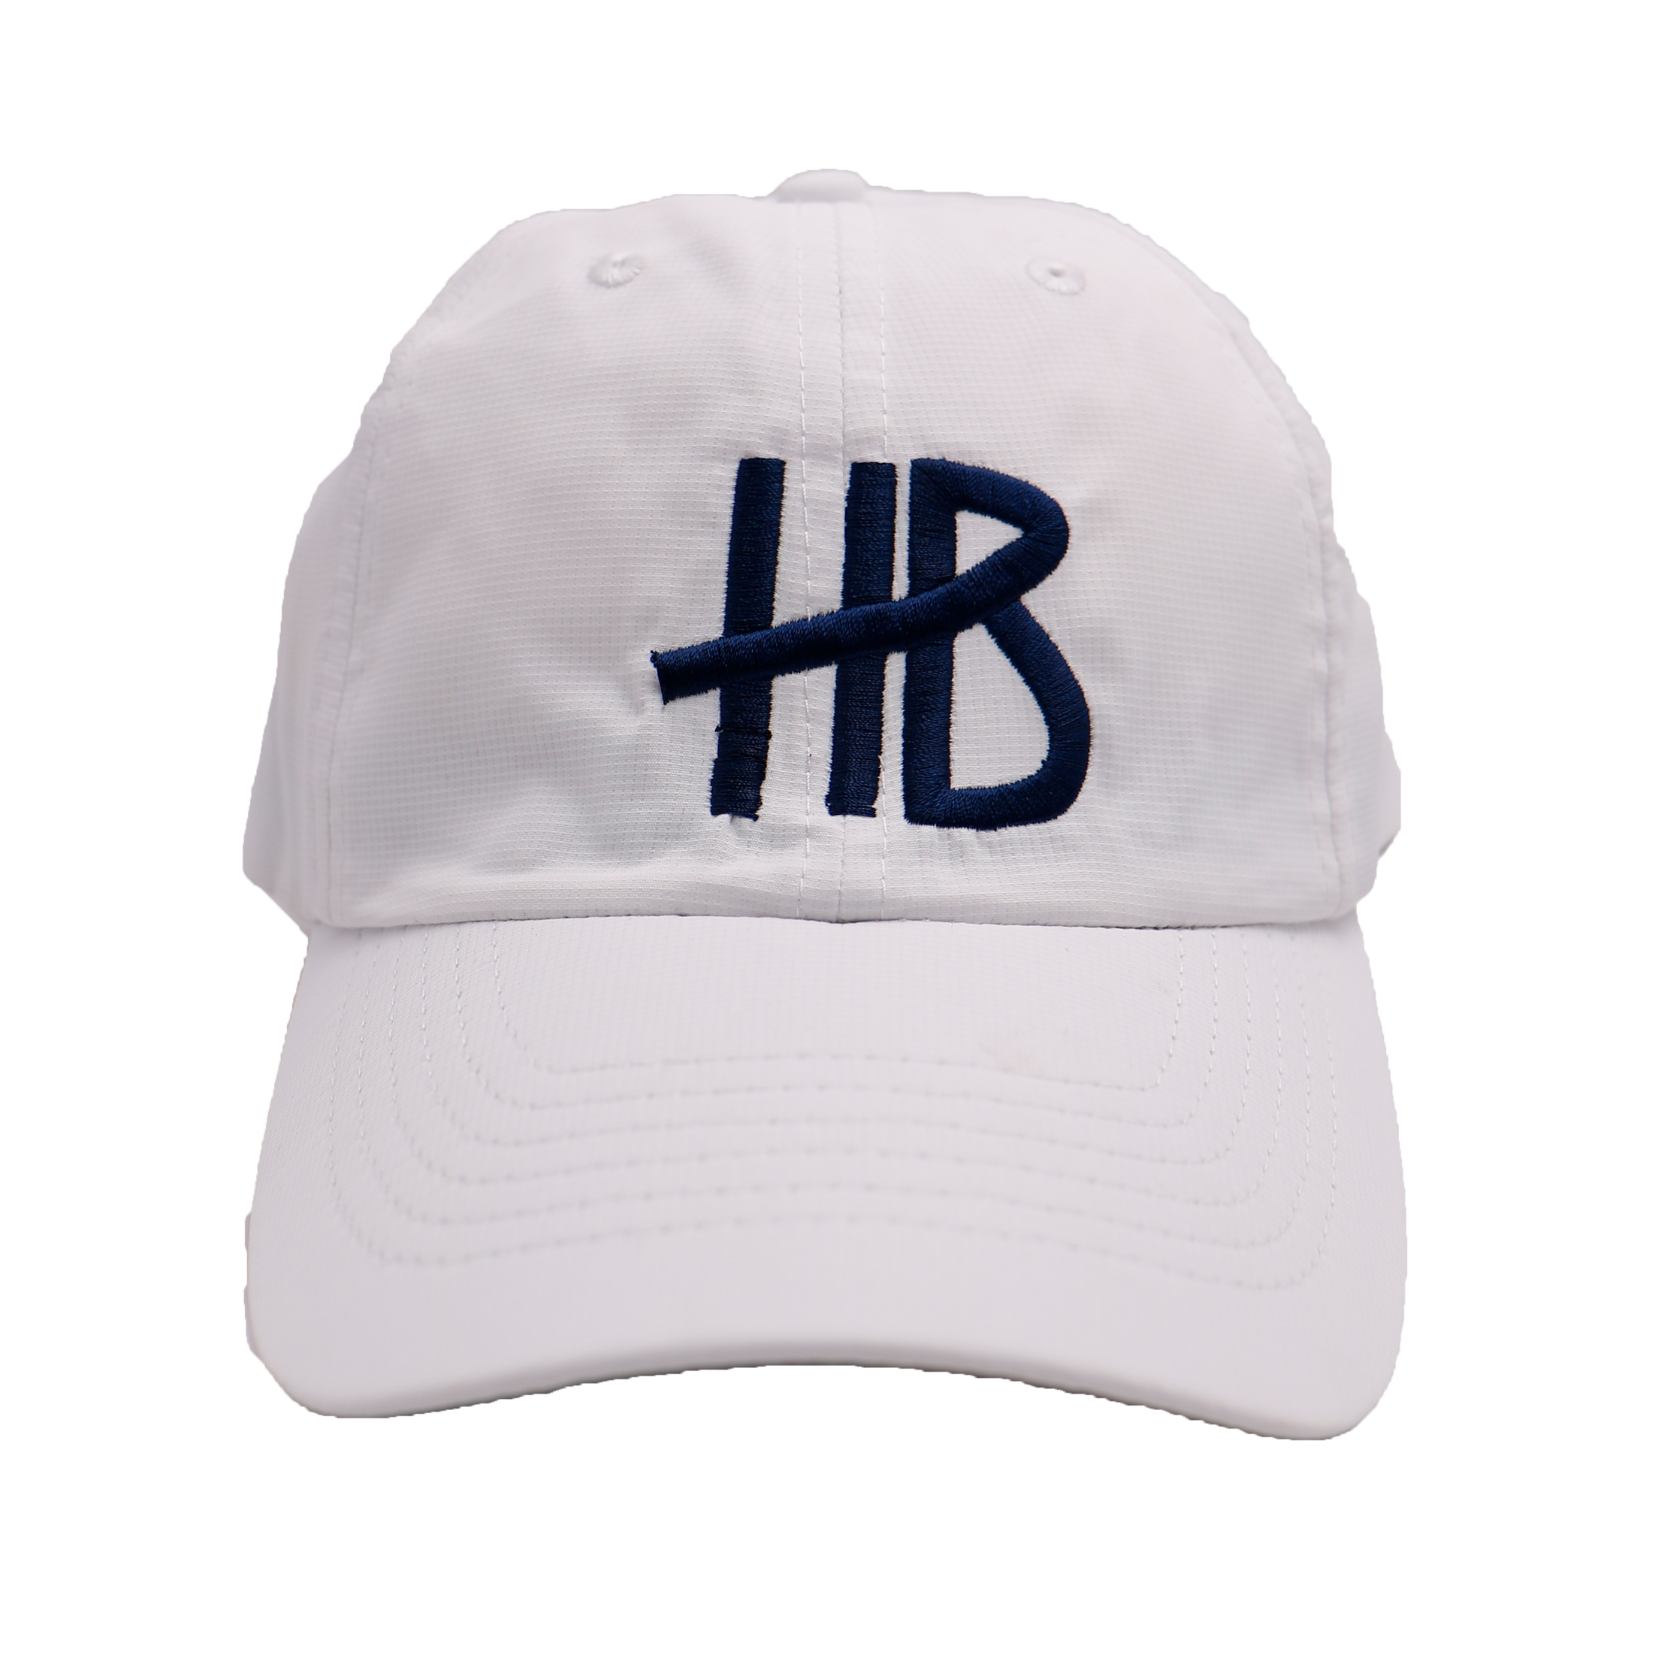 NEW** Hasty Bake Imperial "HB" Logo Cap Adult/Unisex - 4 COLOR OPTIONS